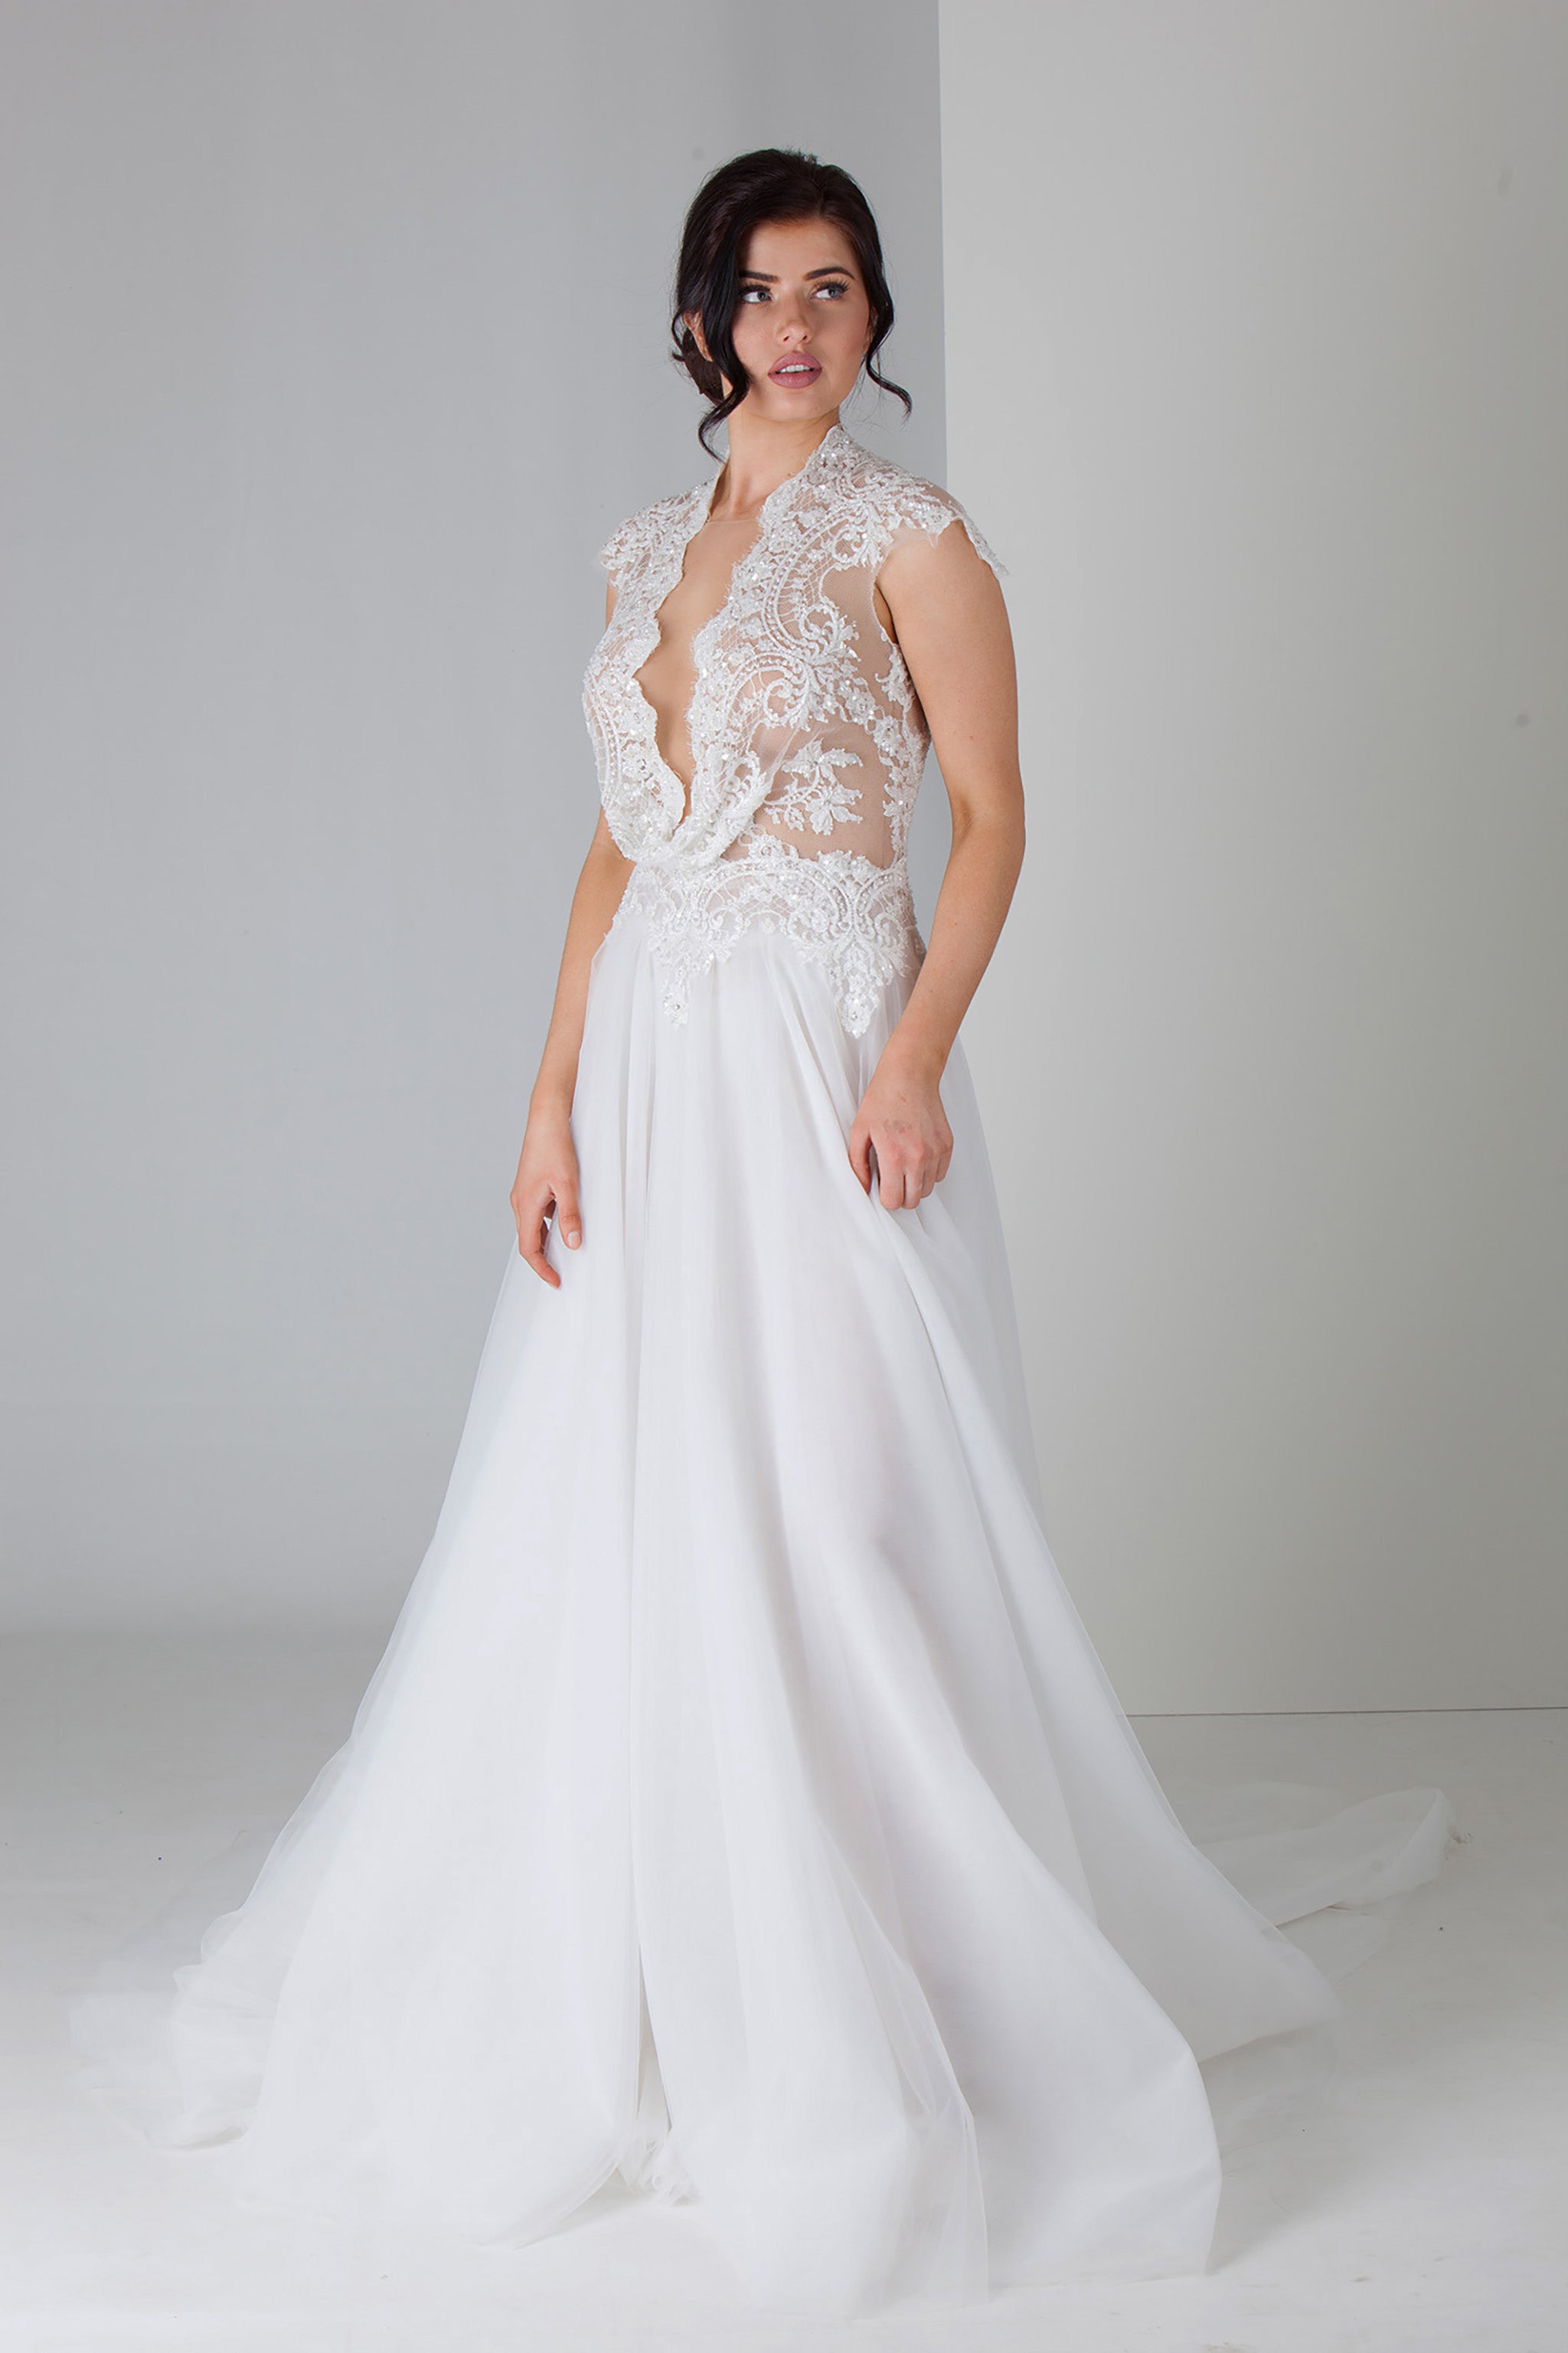 low cut v-neckline wedding gown with full tulle skirt